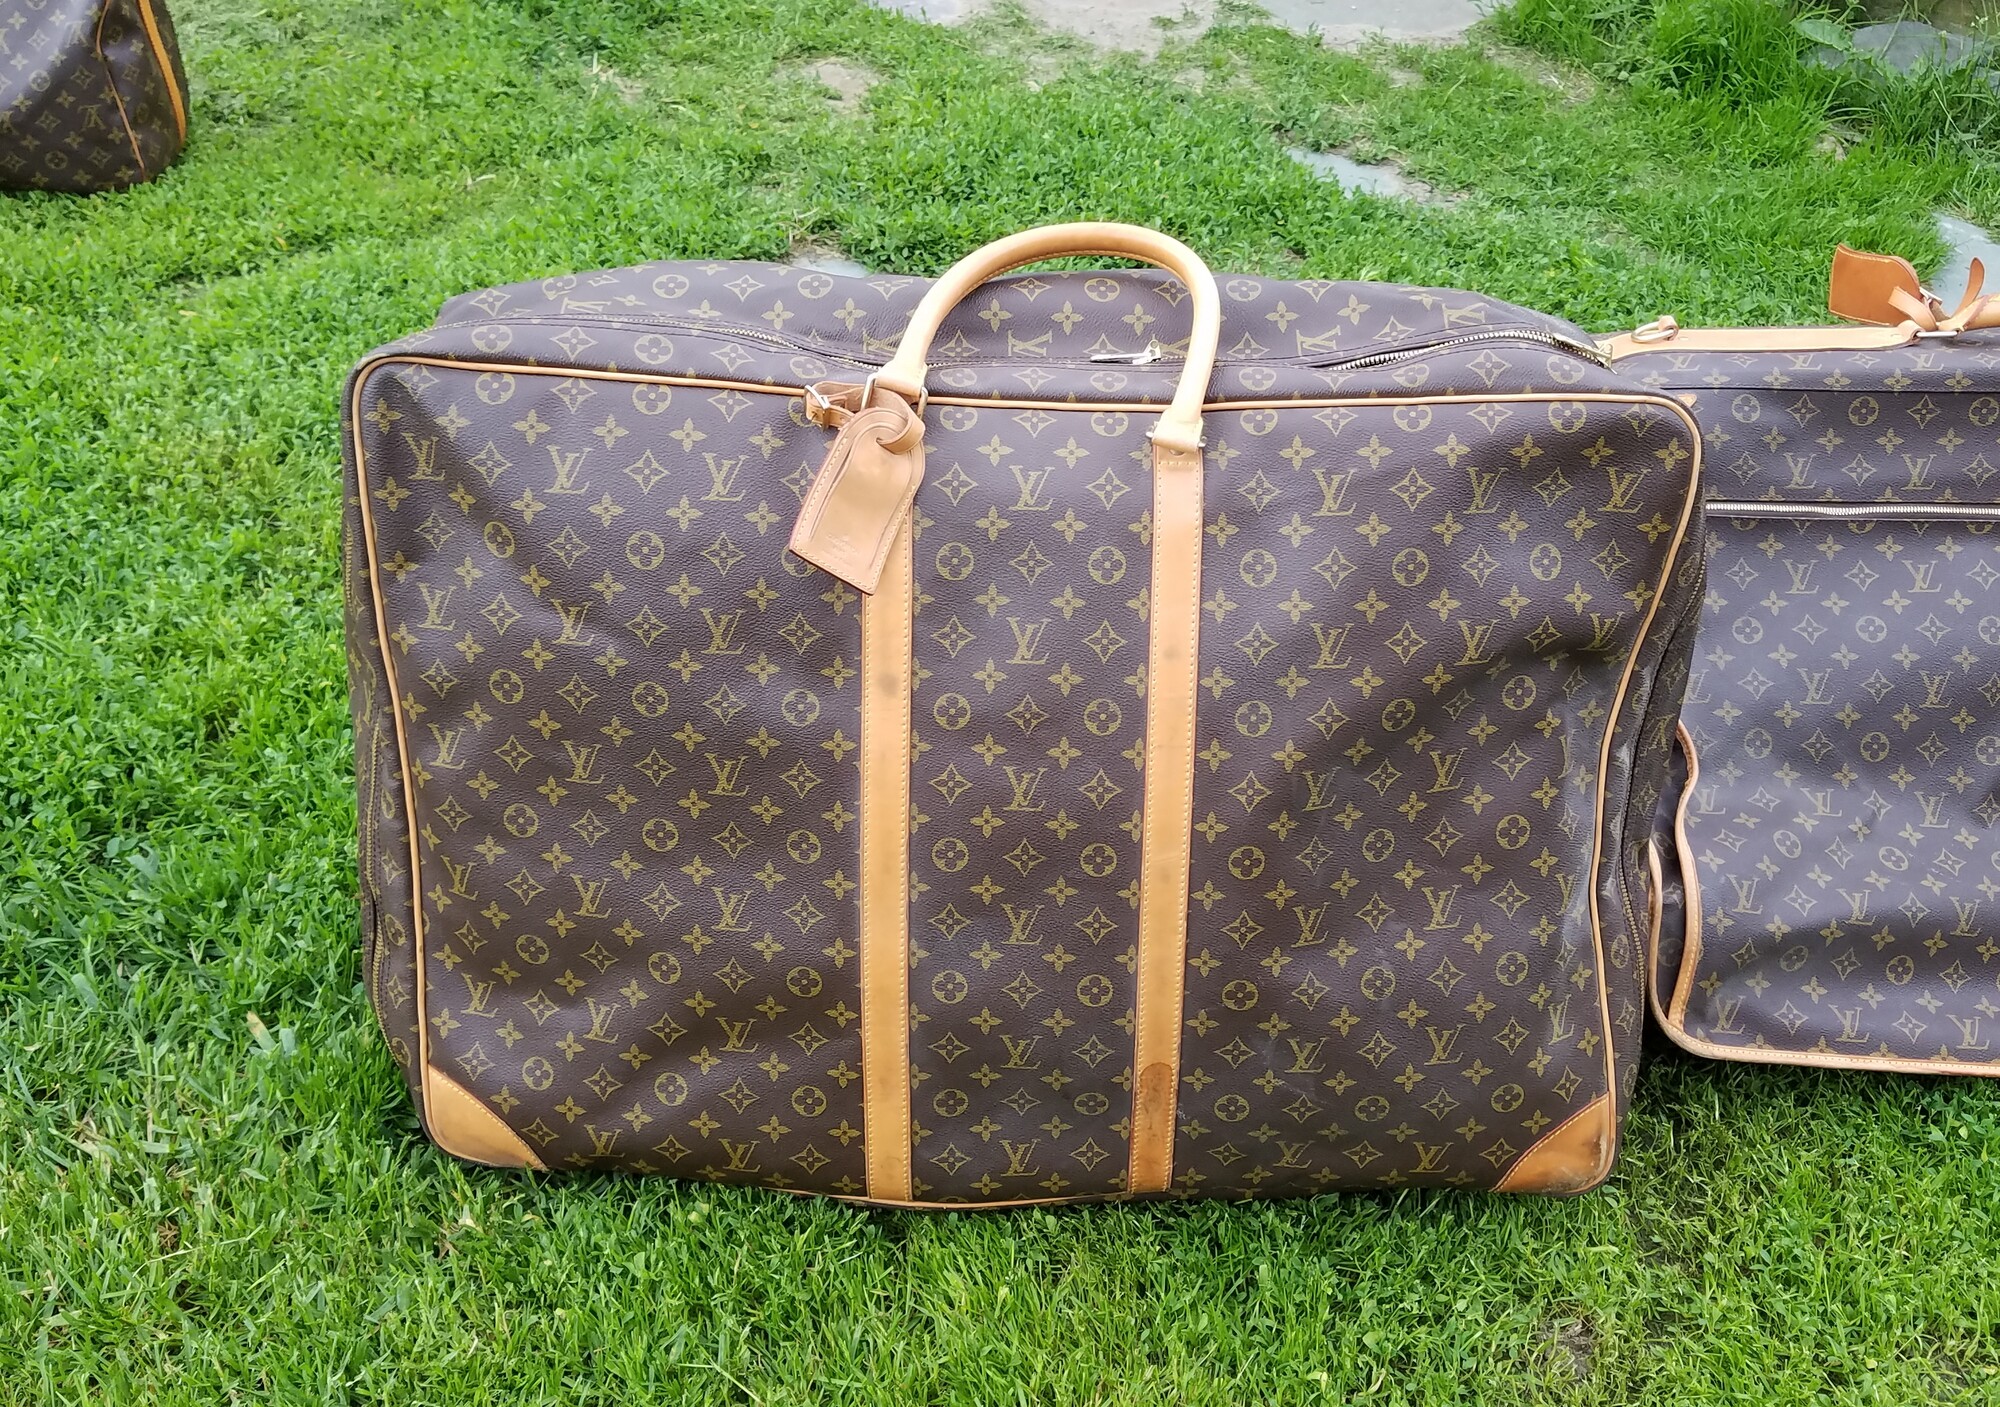 VINTAGE LOUIS VUITTON SUITCASE
CLASSIC MONOGRAM
Size: 20 X 27 X 7.7
DATE CODE SP0026
POSSIBLY MODEL
SIRIUS 70
LUGGAGE ID
LISTING WILL BE UPDATED SOON ON MODEL